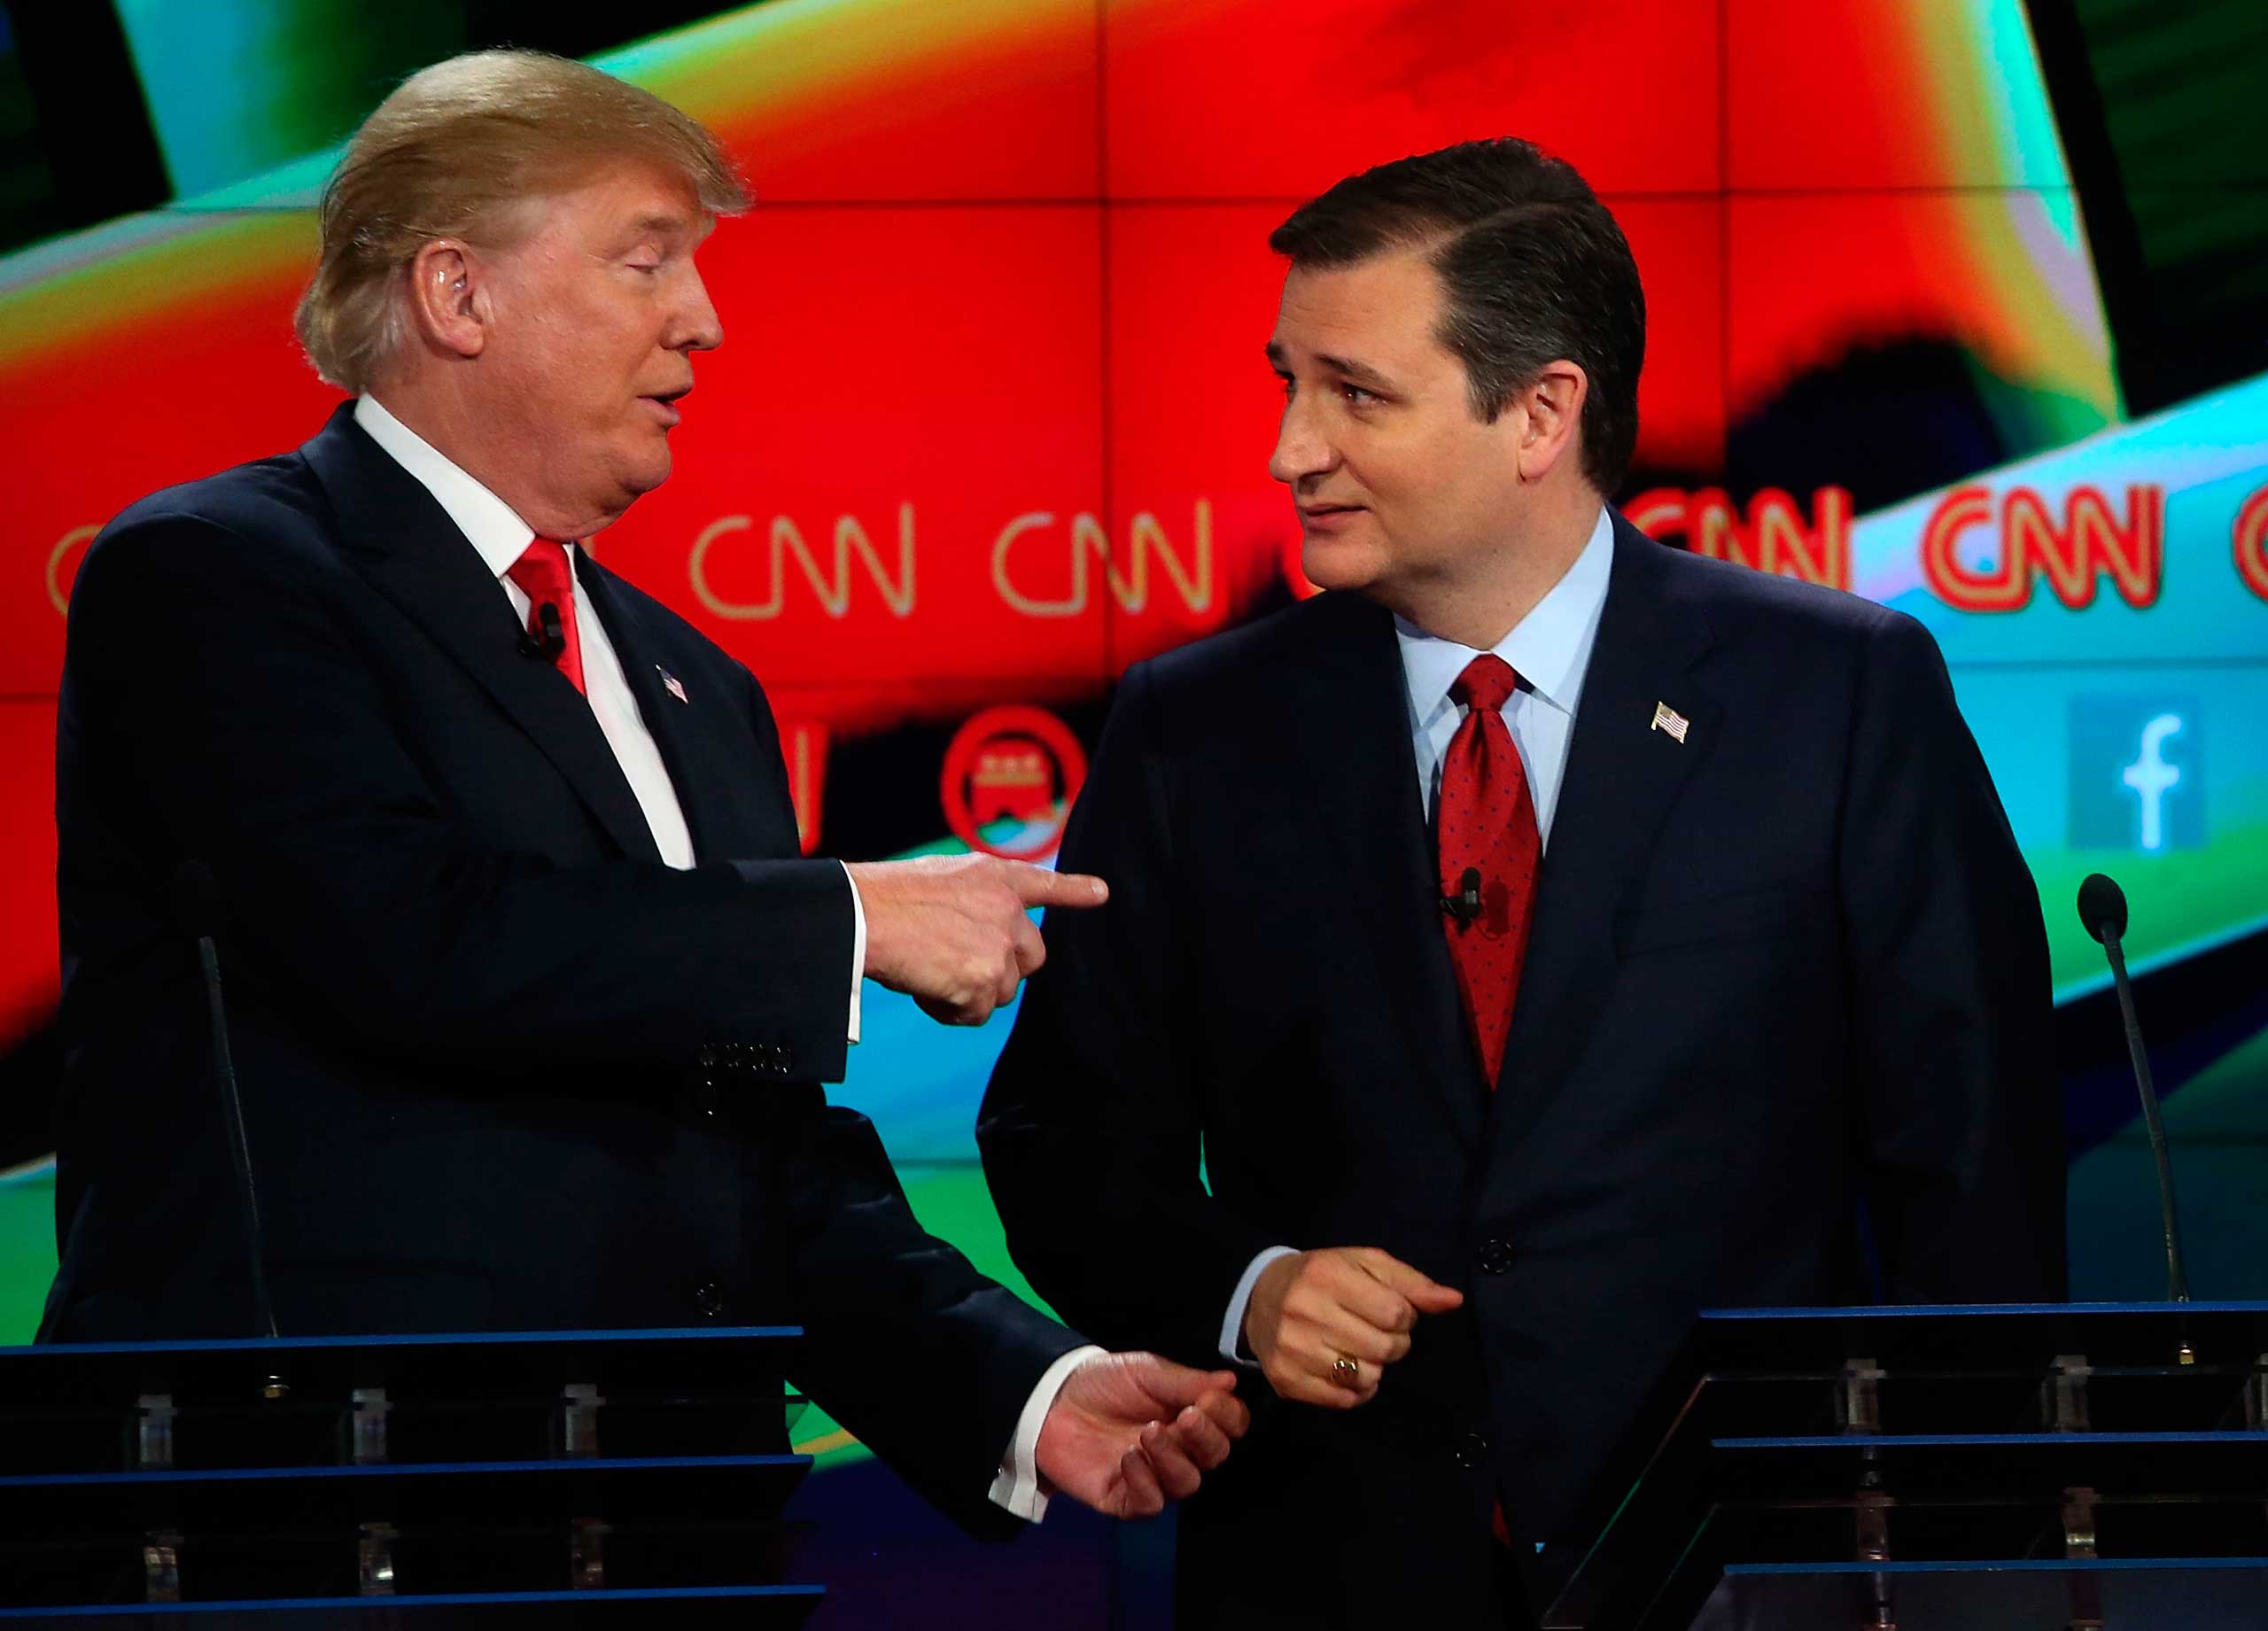 Republican presidential candidates Donald Trump and Sen. Ted Cruz (R-TX) interact at the conclusion of CNN's GOP presidential debate at The Venetian Las Vegas on Dec. 15, 2015. (Justin Sullivan—Getty Images)